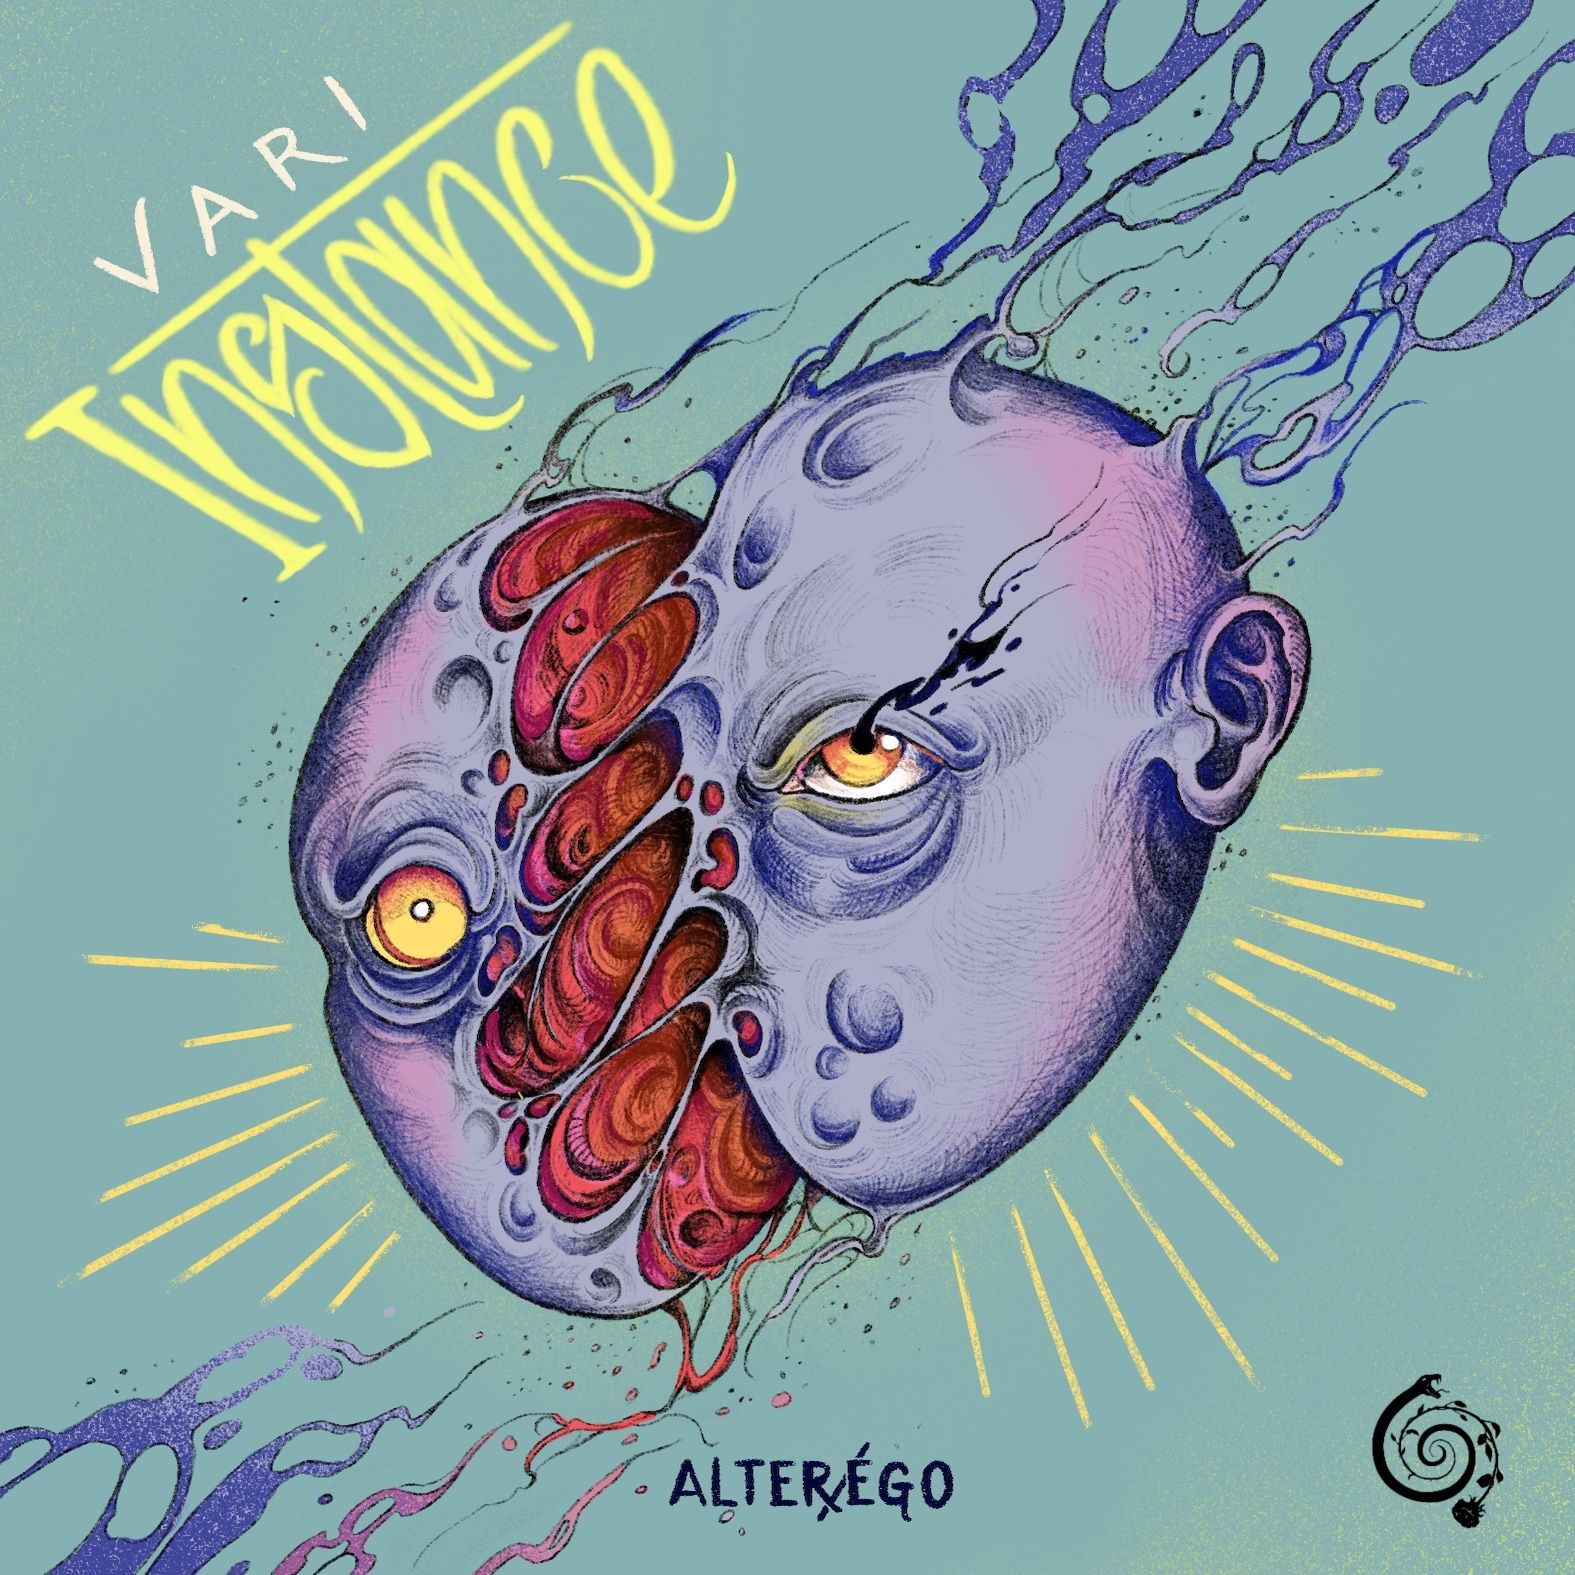 Alter/Ego Returns with “Instance” by VARI